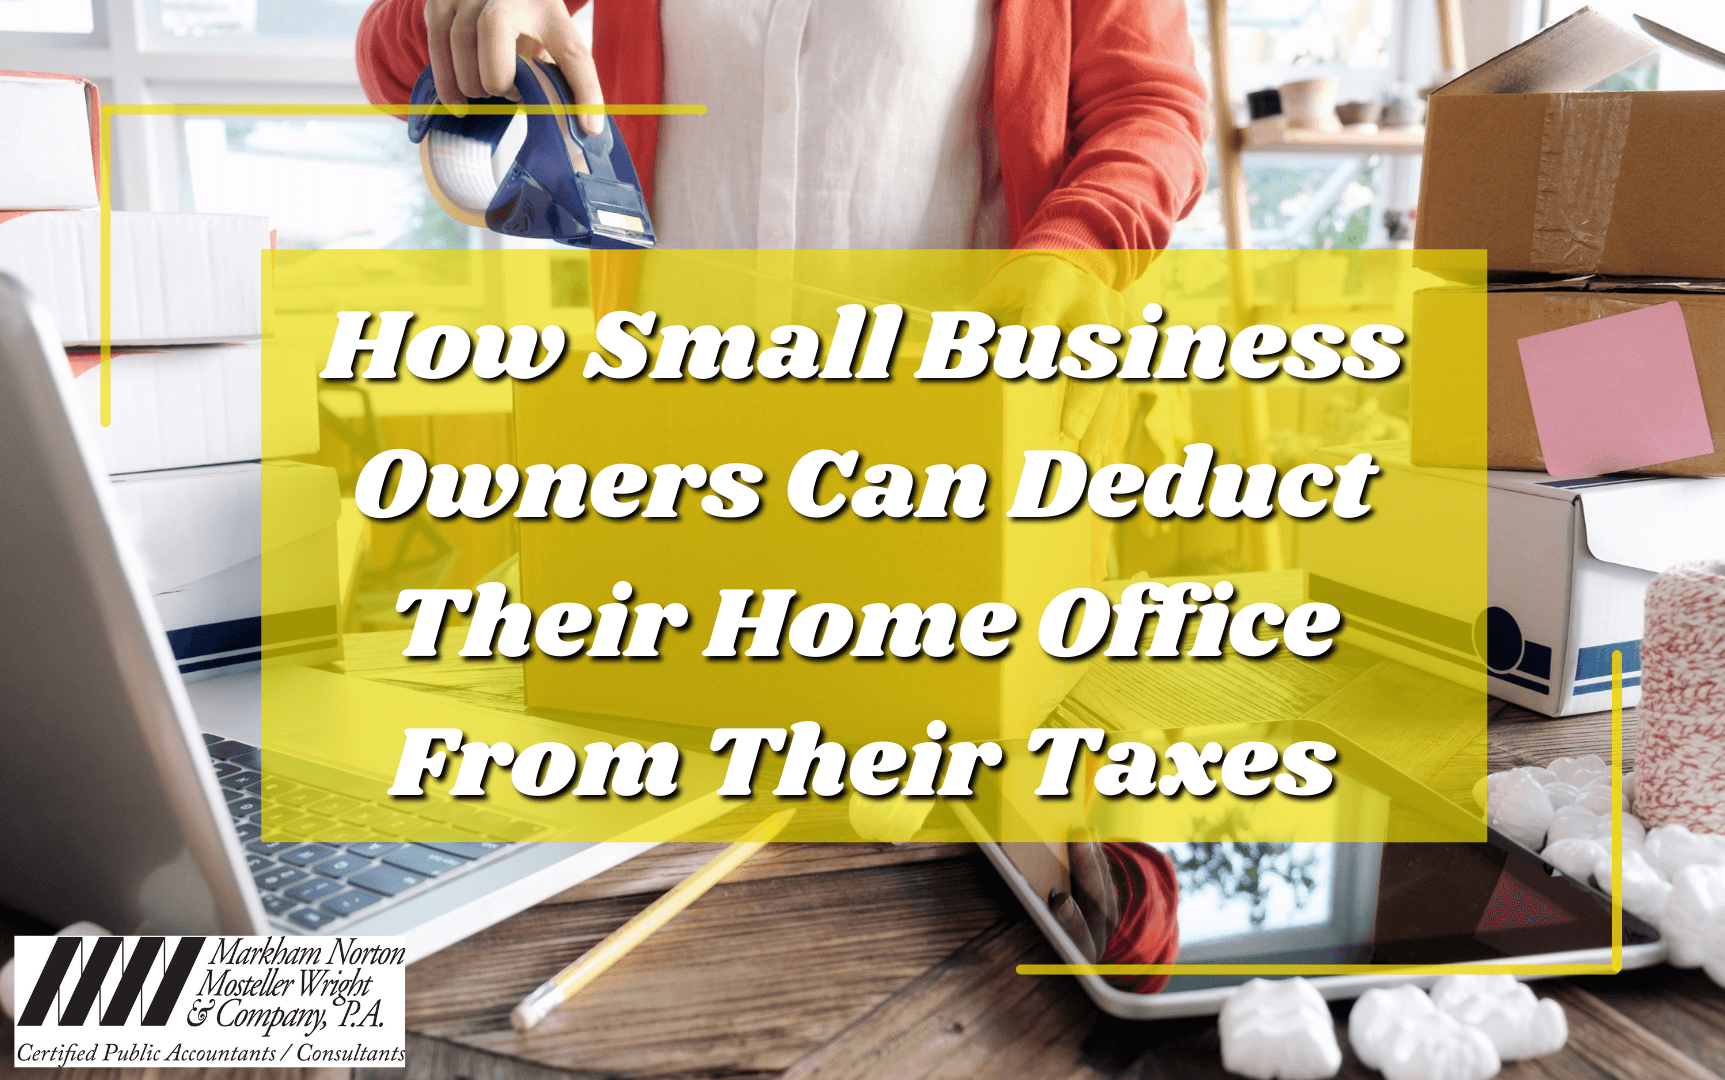 Small Businesses Deduct Home Taxes